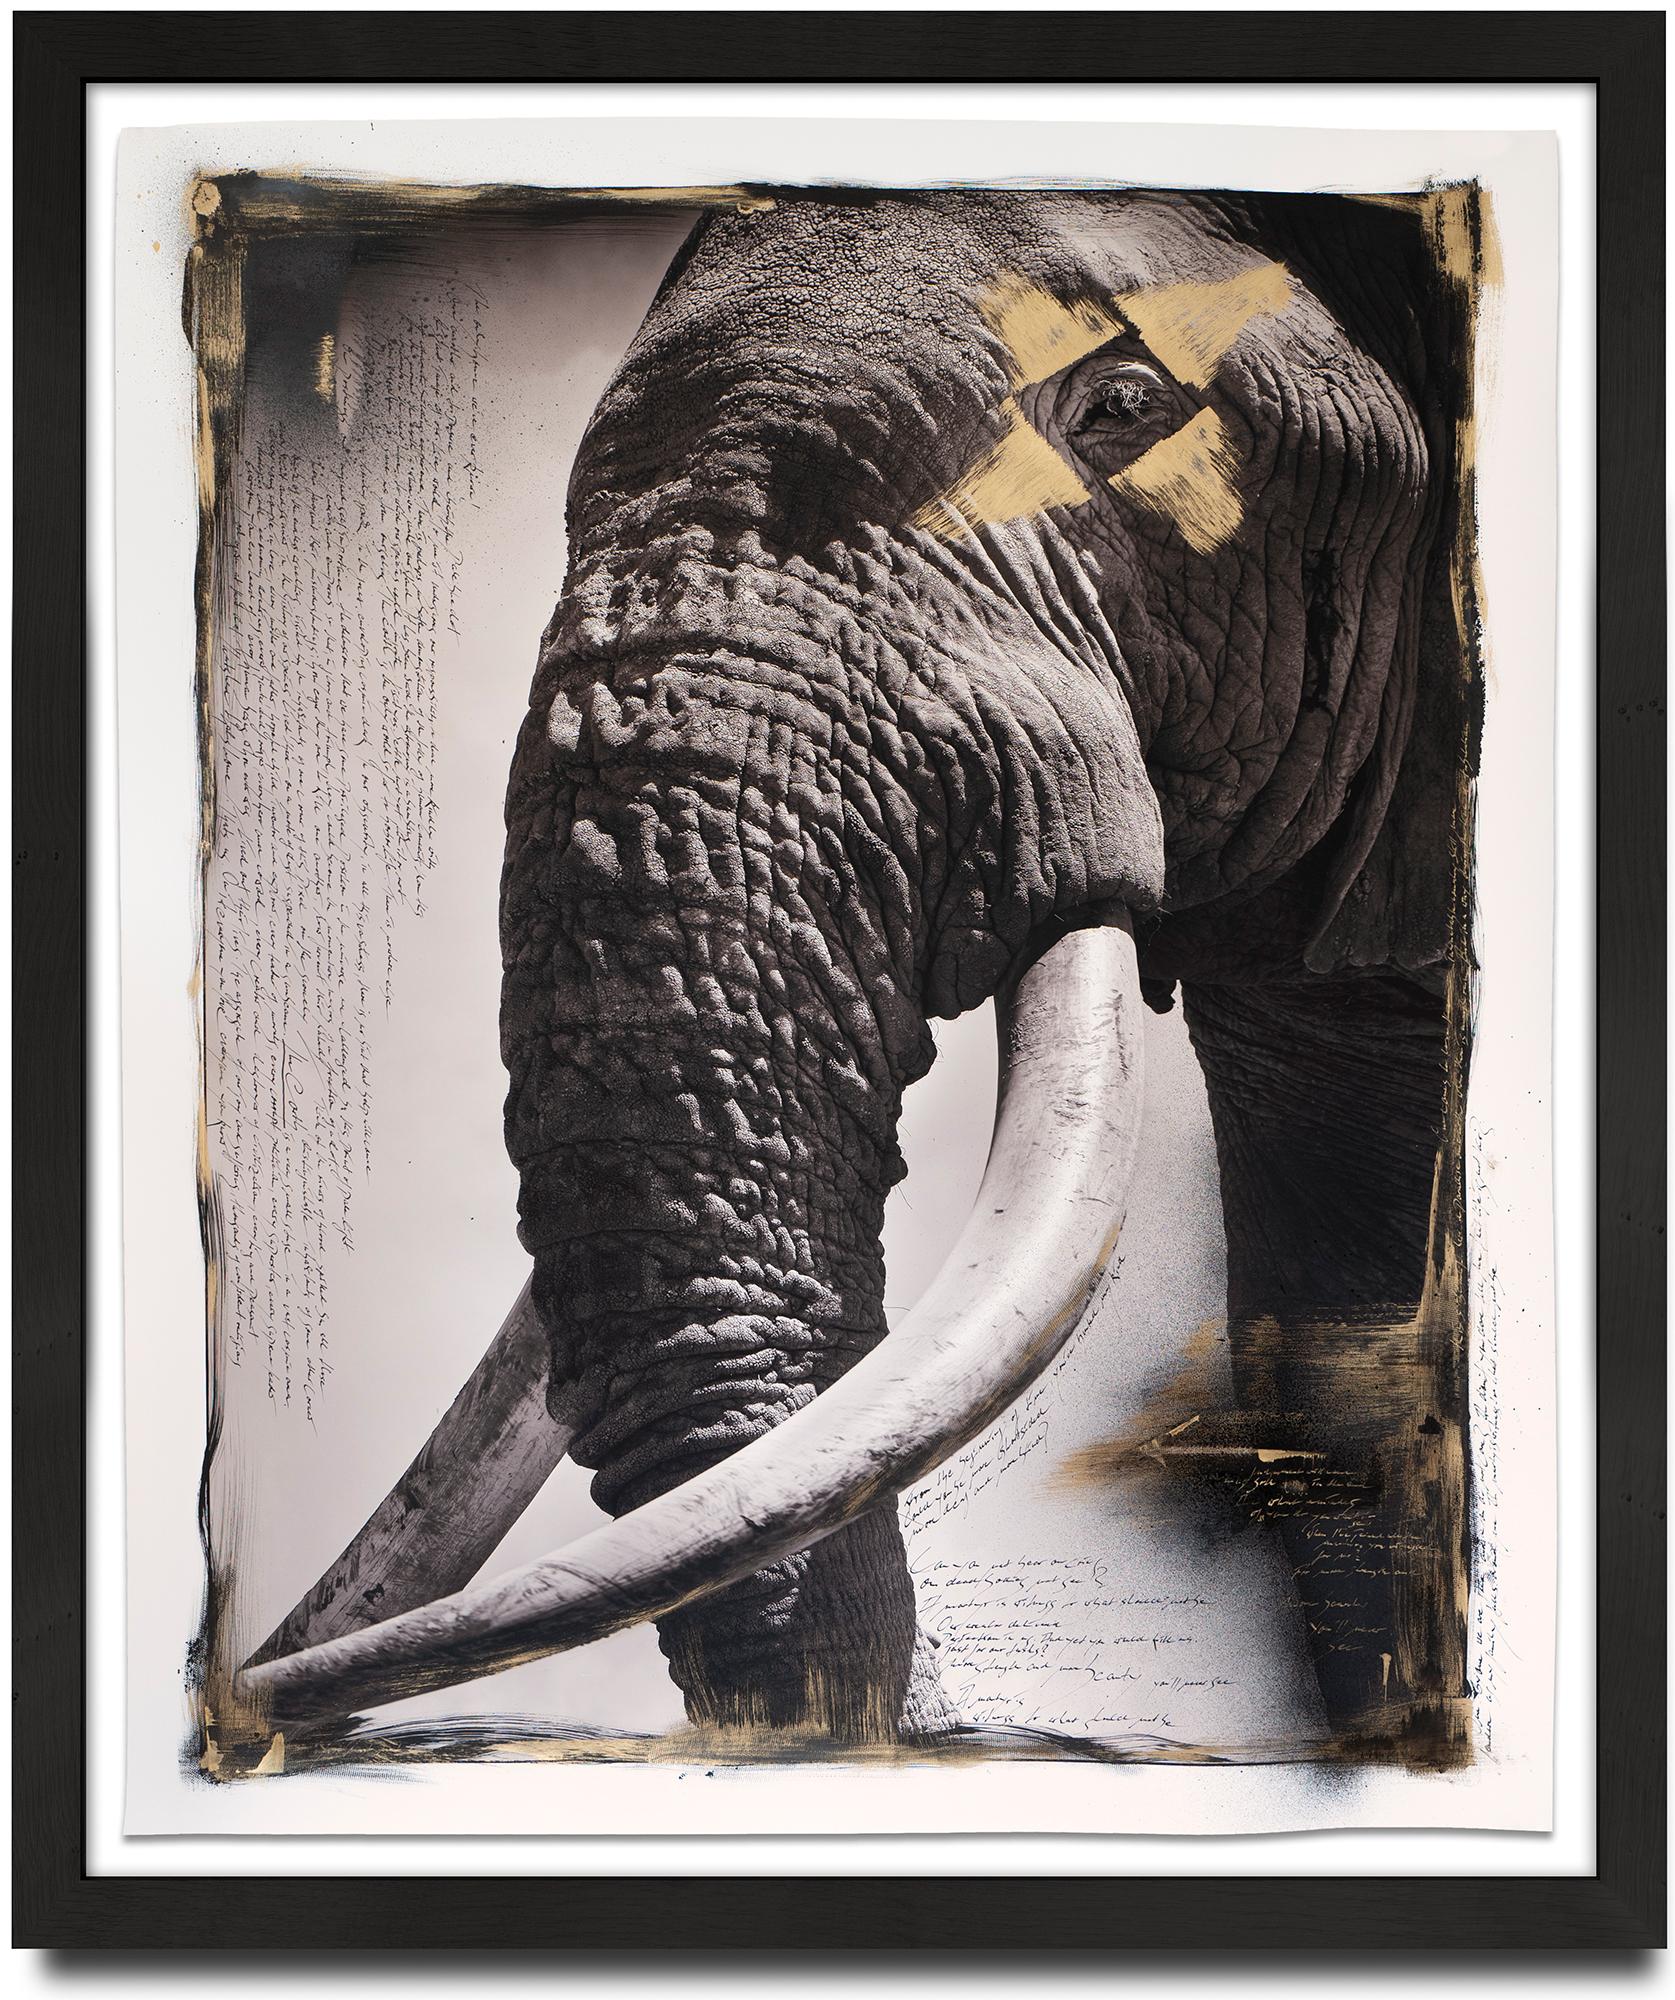 Tim - the Gentle Giant, Elephant, Mixed Media, black and white photography - Painting by Joachim Schmeisser